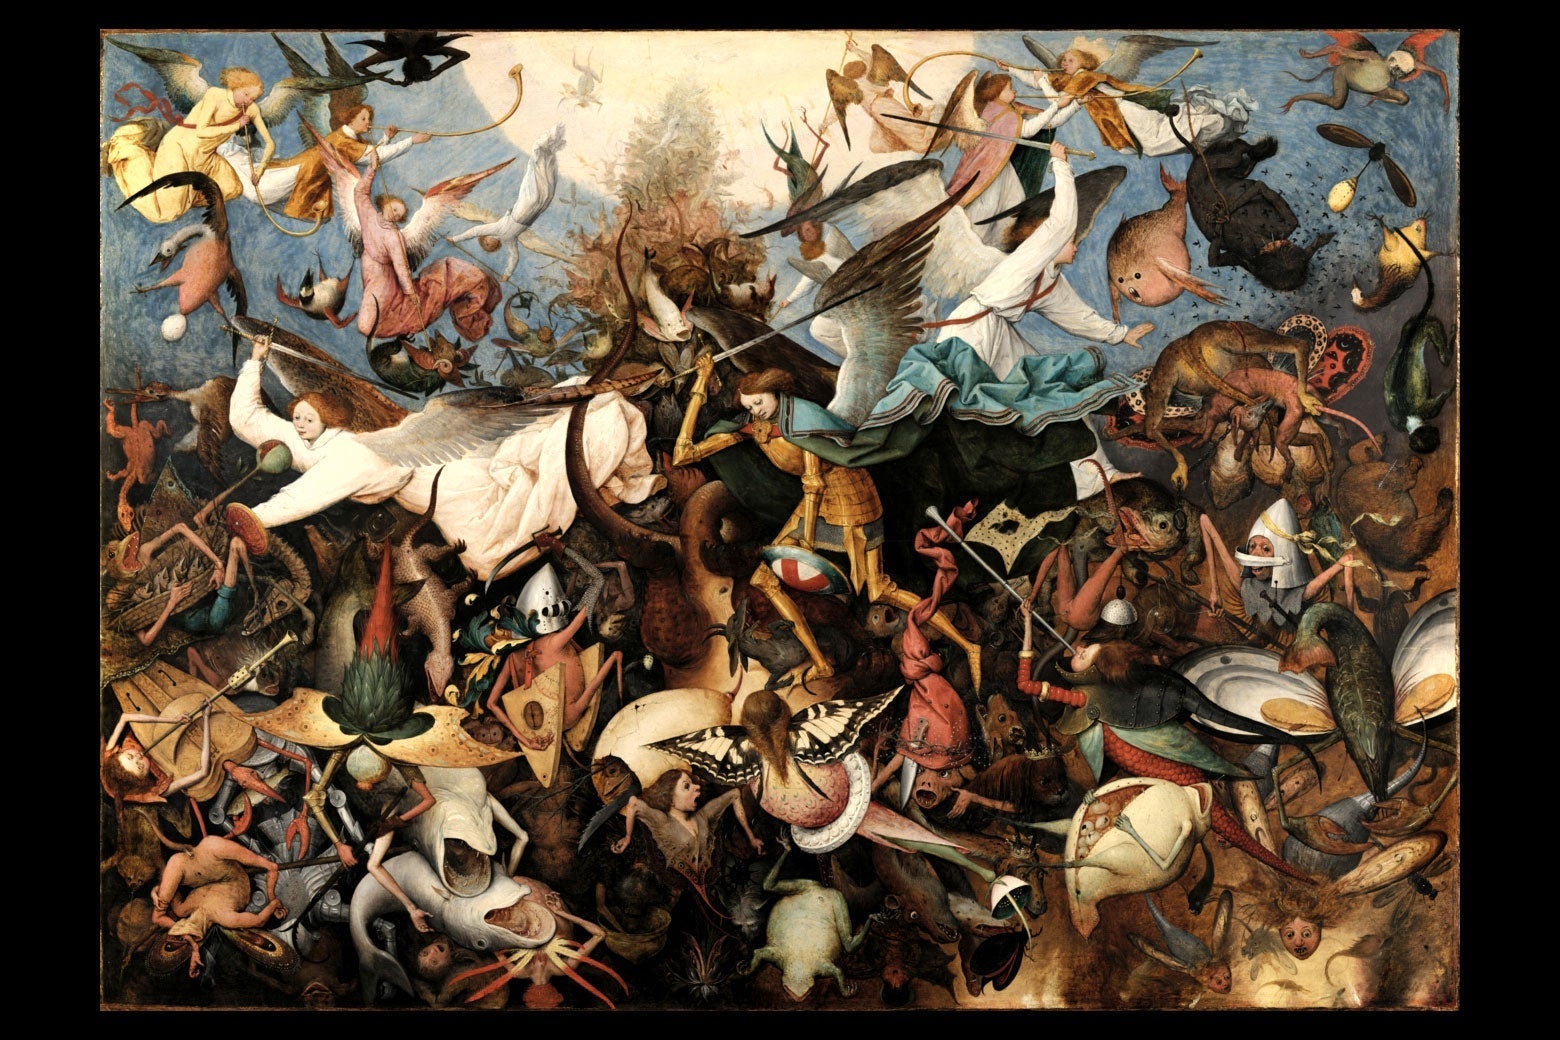 Bruegel's painting depicting a chaotic array of angels